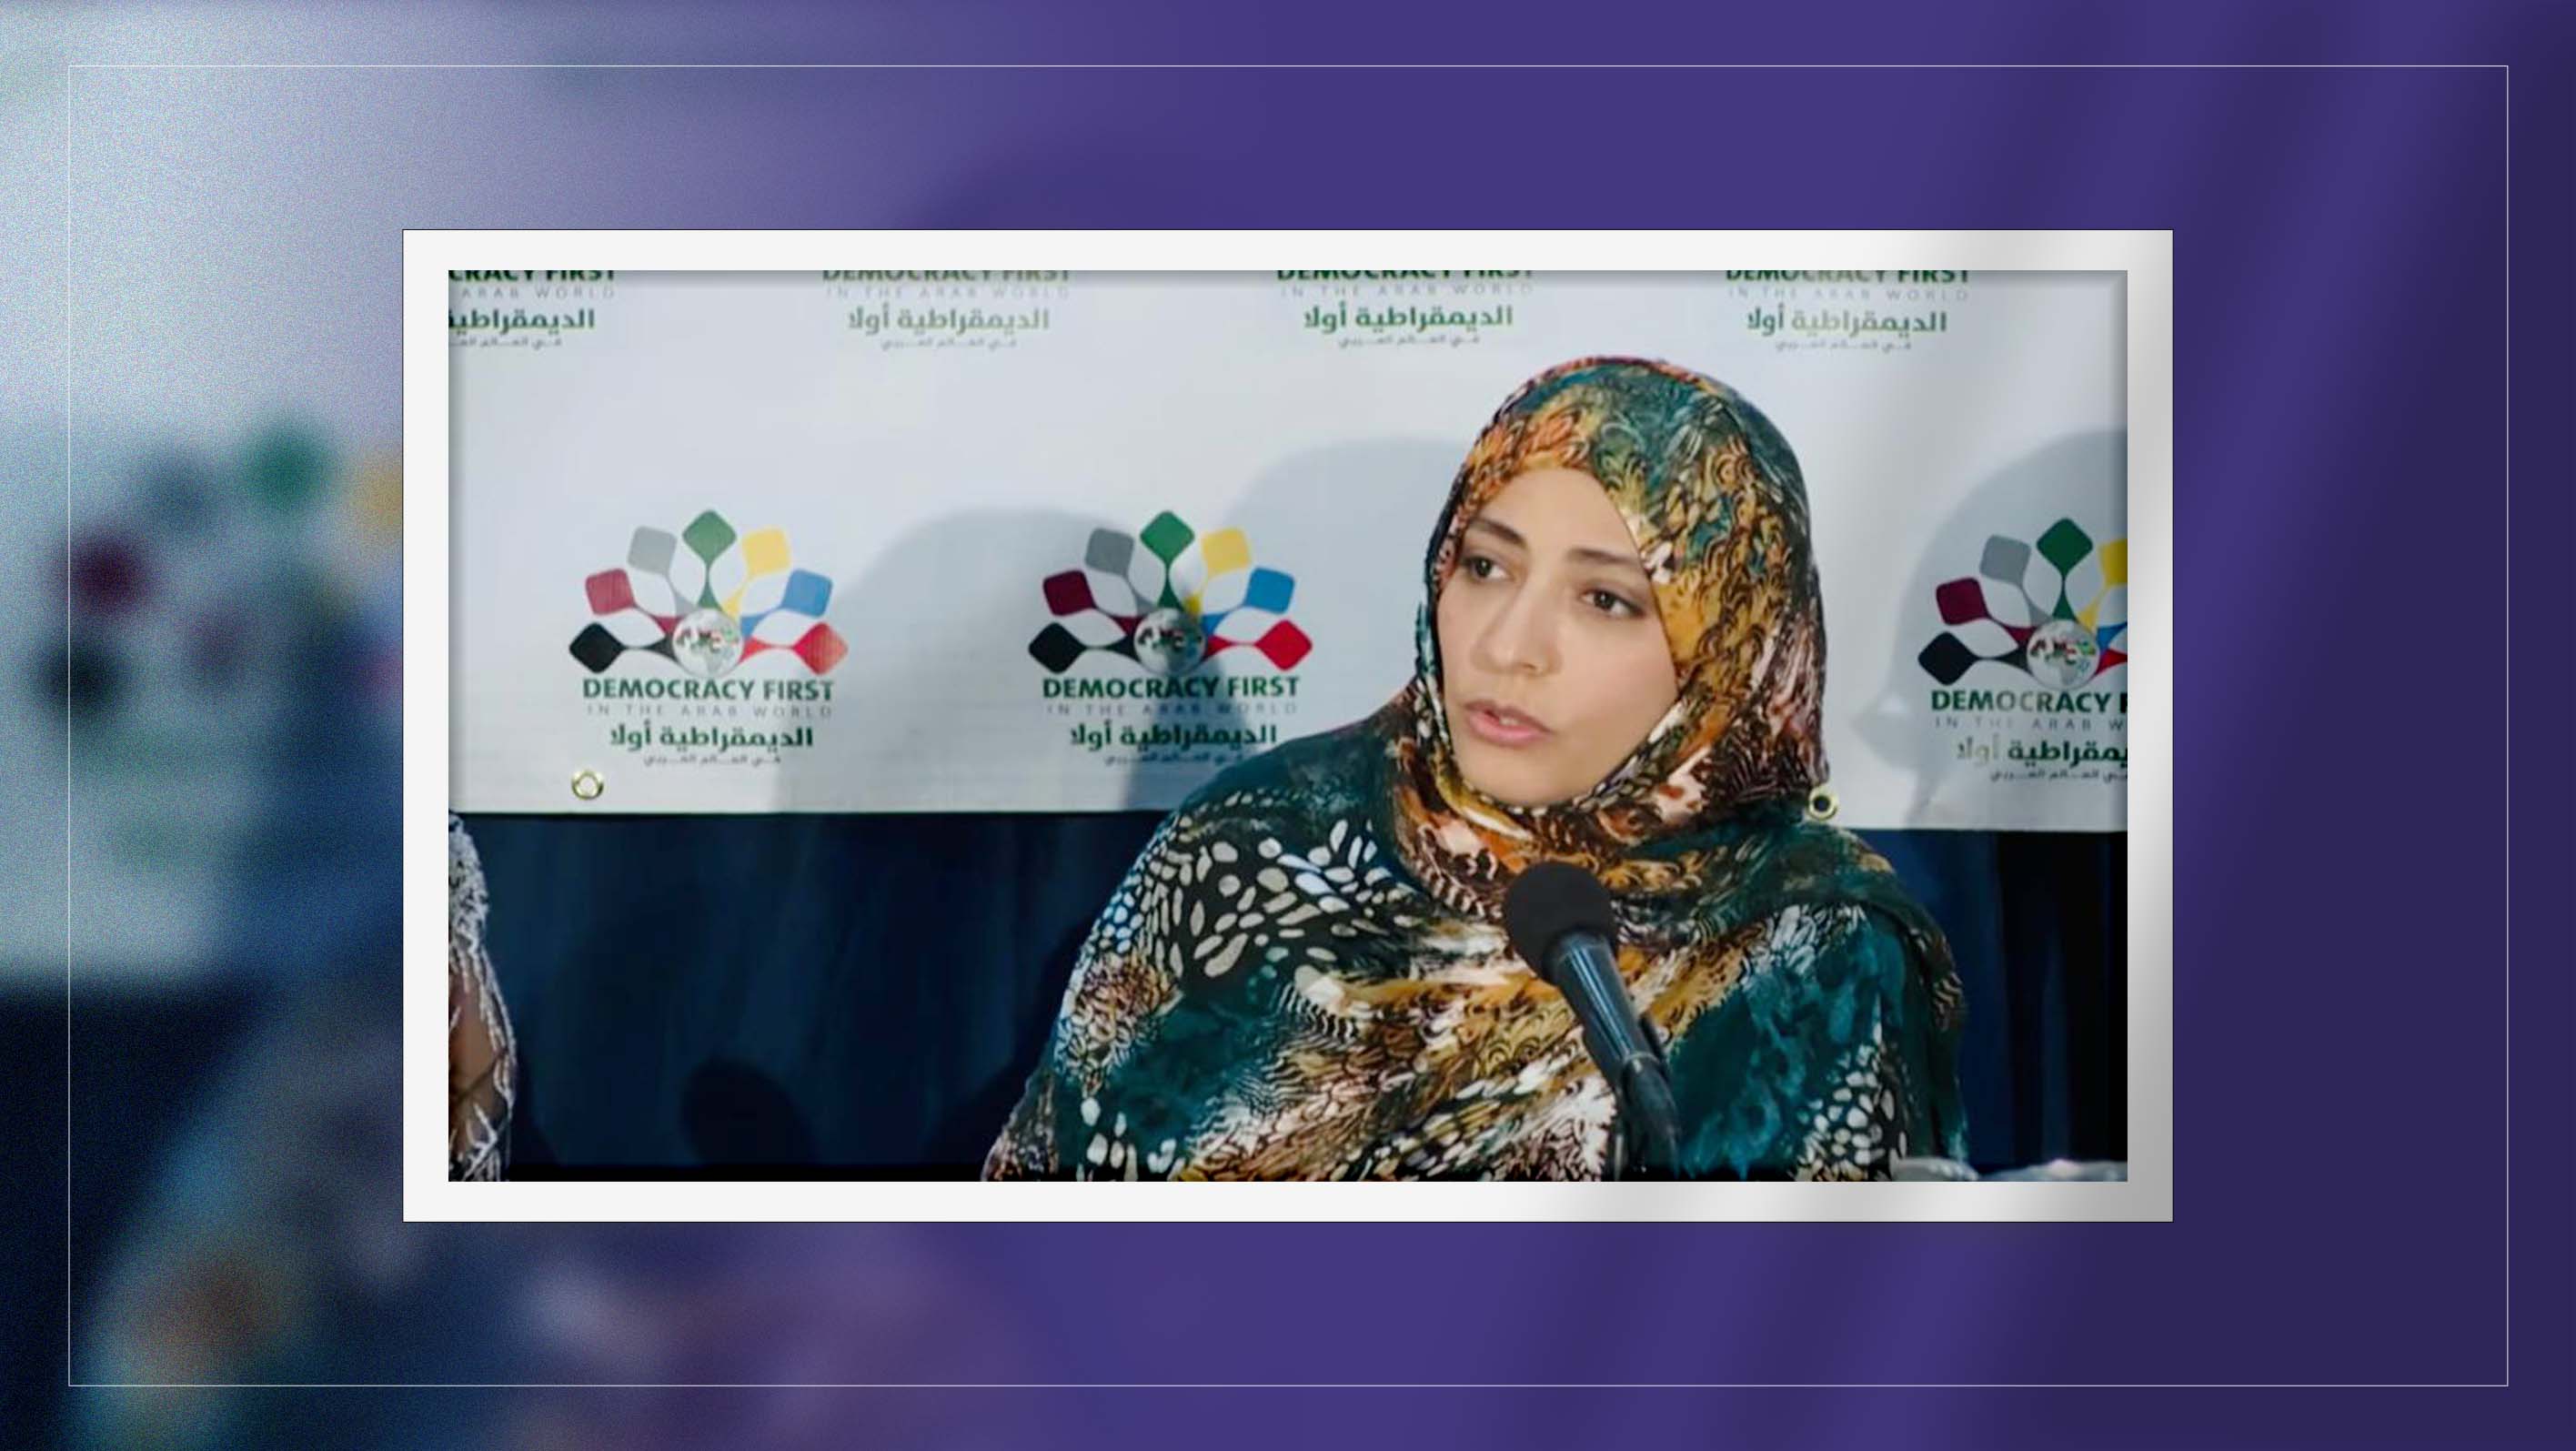 Mrs. Karman takes part in “Democracy First in the Arab World”